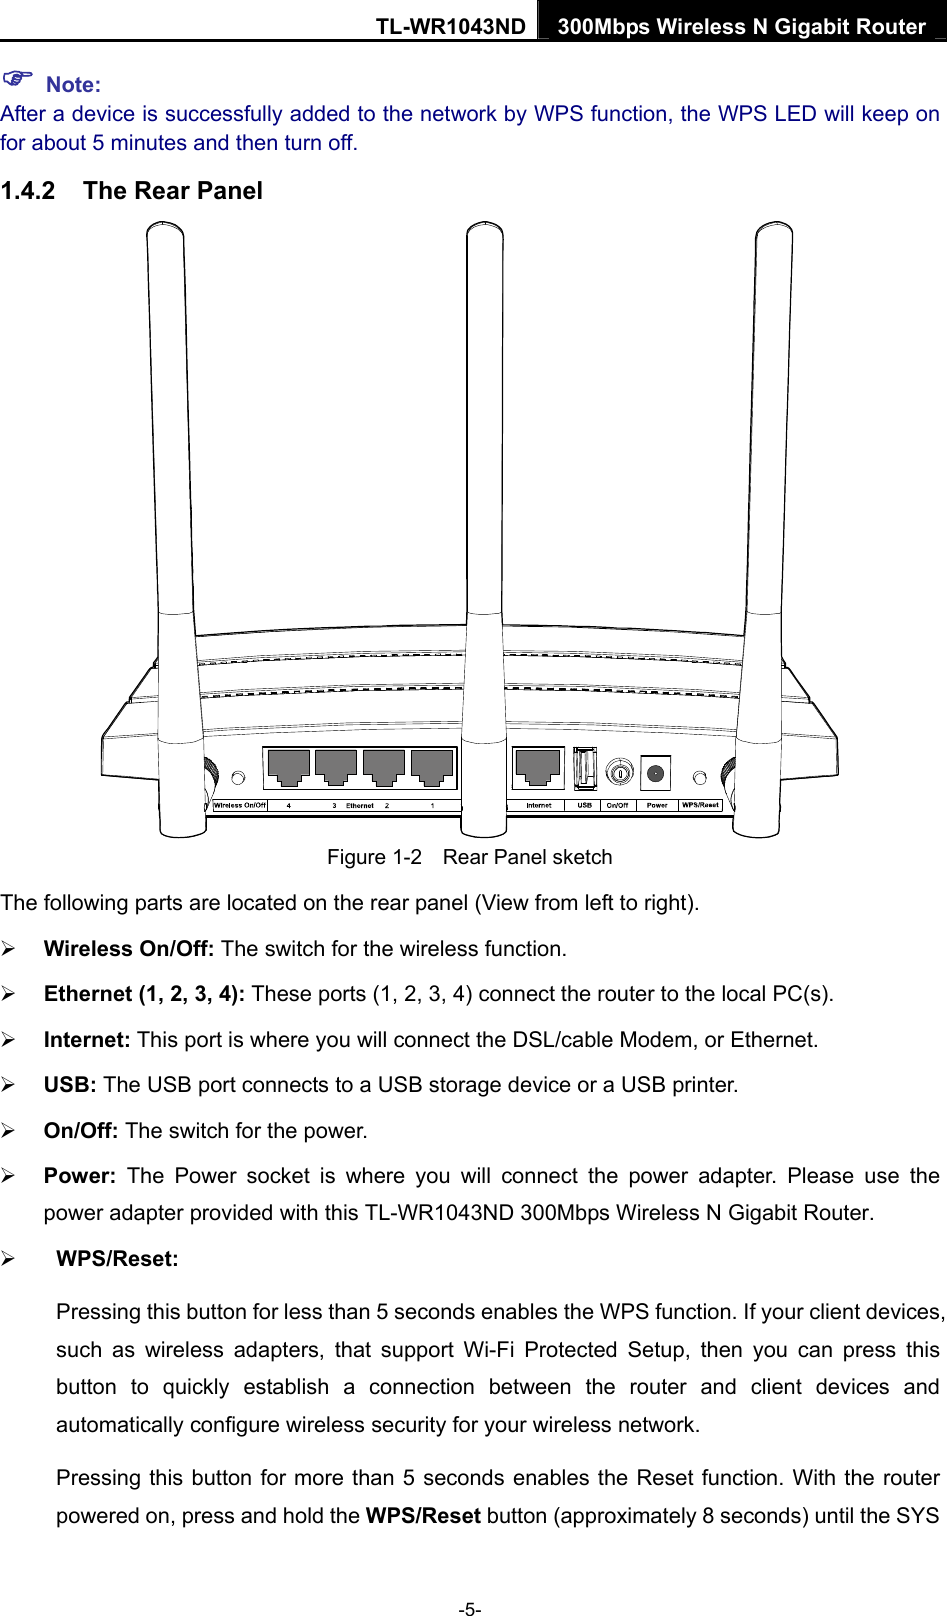 TL-WR1043ND 300Mbps Wireless N Gigabit Router  ) Note: After a device is successfully added to the network by WPS function, the WPS LED will keep on for about 5 minutes and then turn off. 1.4.2  The Rear Panel  Figure 1-2    Rear Panel sketch The following parts are located on the rear panel (View from left to right). ¾ Wireless On/Off: The switch for the wireless function. ¾ Ethernet (1, 2, 3, 4): These ports (1, 2, 3, 4) connect the router to the local PC(s). ¾ Internet: This port is where you will connect the DSL/cable Modem, or Ethernet. ¾ USB: The USB port connects to a USB storage device or a USB printer. ¾ On/Off: The switch for the power. ¾ Power:  The Power socket is where you will connect the power adapter. Please use the power adapter provided with this TL-WR1043ND 300Mbps Wireless N Gigabit Router.   ¾ WPS/Reset:   Pressing this button for less than 5 seconds enables the WPS function. If your client devices, such as wireless adapters, that support Wi-Fi Protected Setup, then you can press this button to quickly establish a connection between the router and client devices and automatically configure wireless security for your wireless network.   Pressing this button for more than 5 seconds enables the Reset function. With the router powered on, press and hold the WPS/Reset button (approximately 8 seconds) until the SYS -5- 